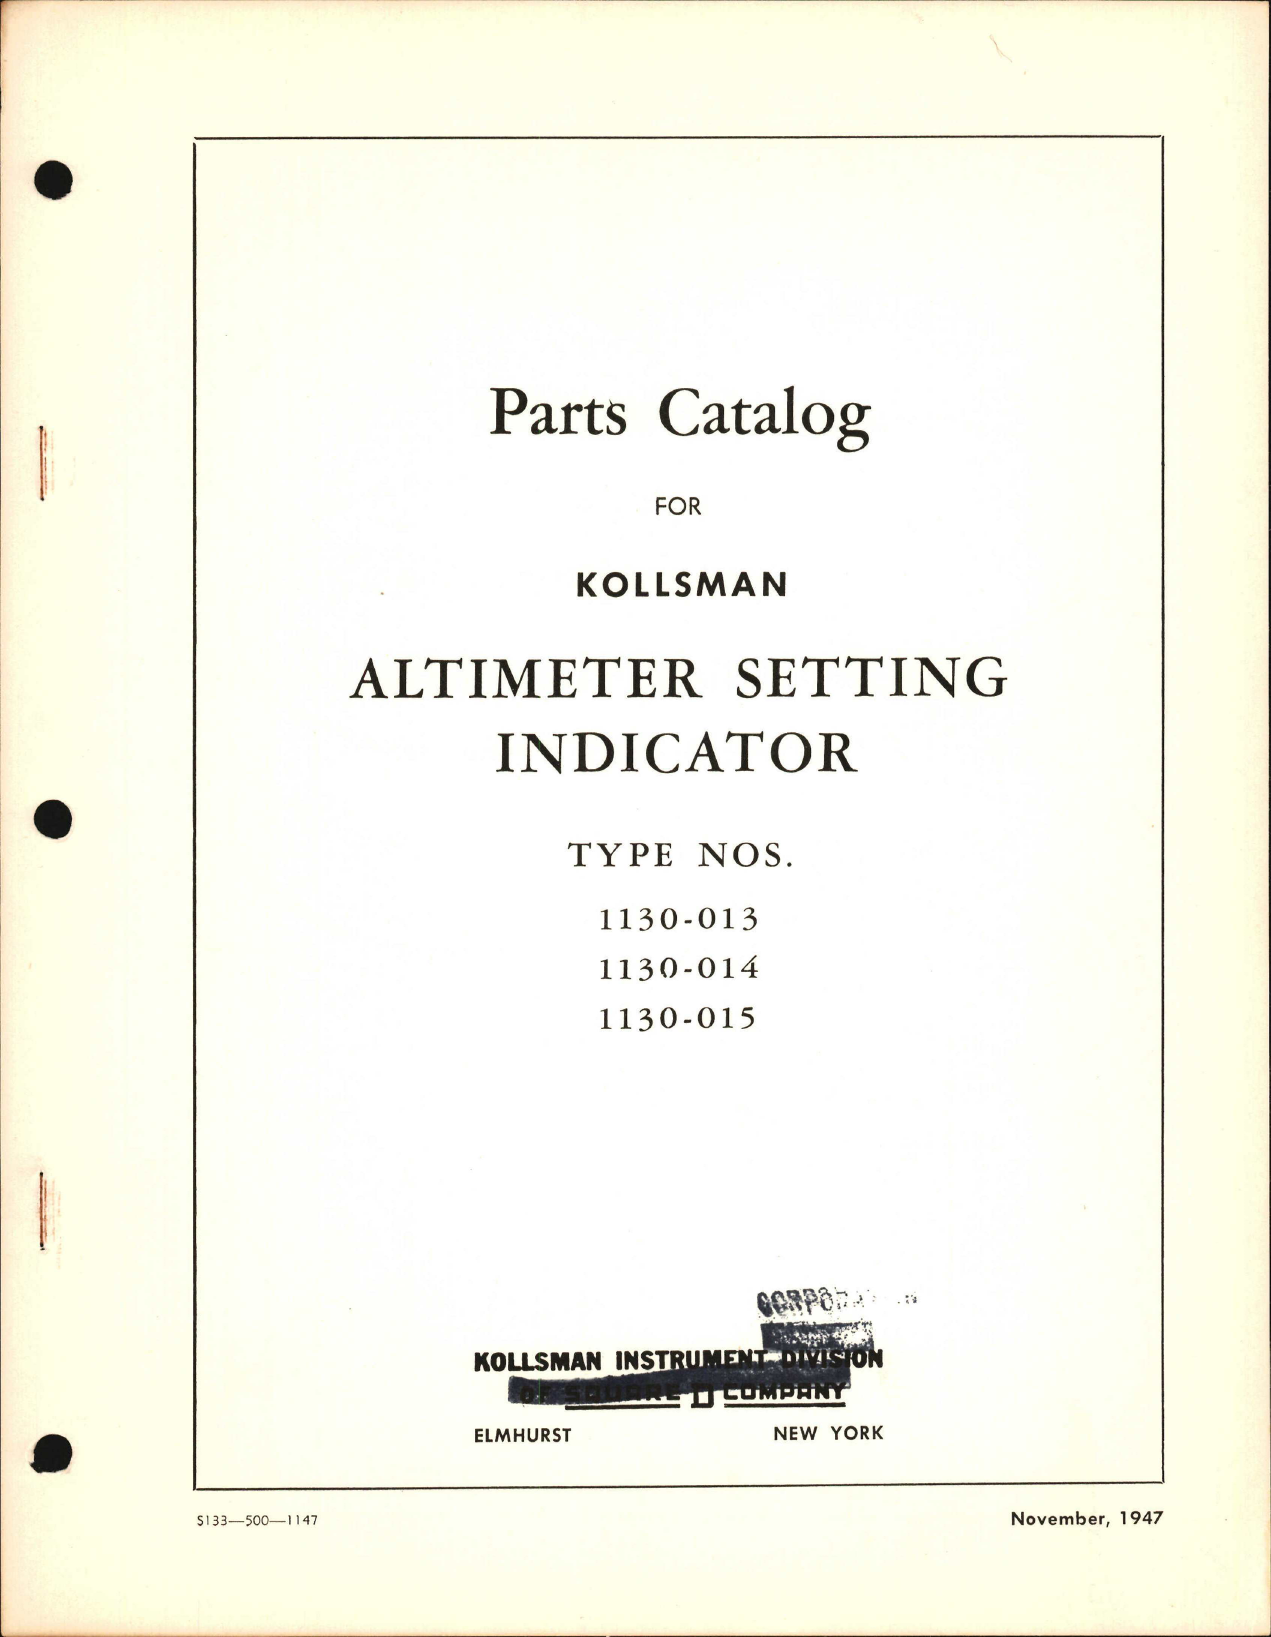 Sample page 1 from AirCorps Library document: S133-500-1147, Parts Catalog for Kollsman Altimeter Setting Indicator, Nov-1947, FKohler